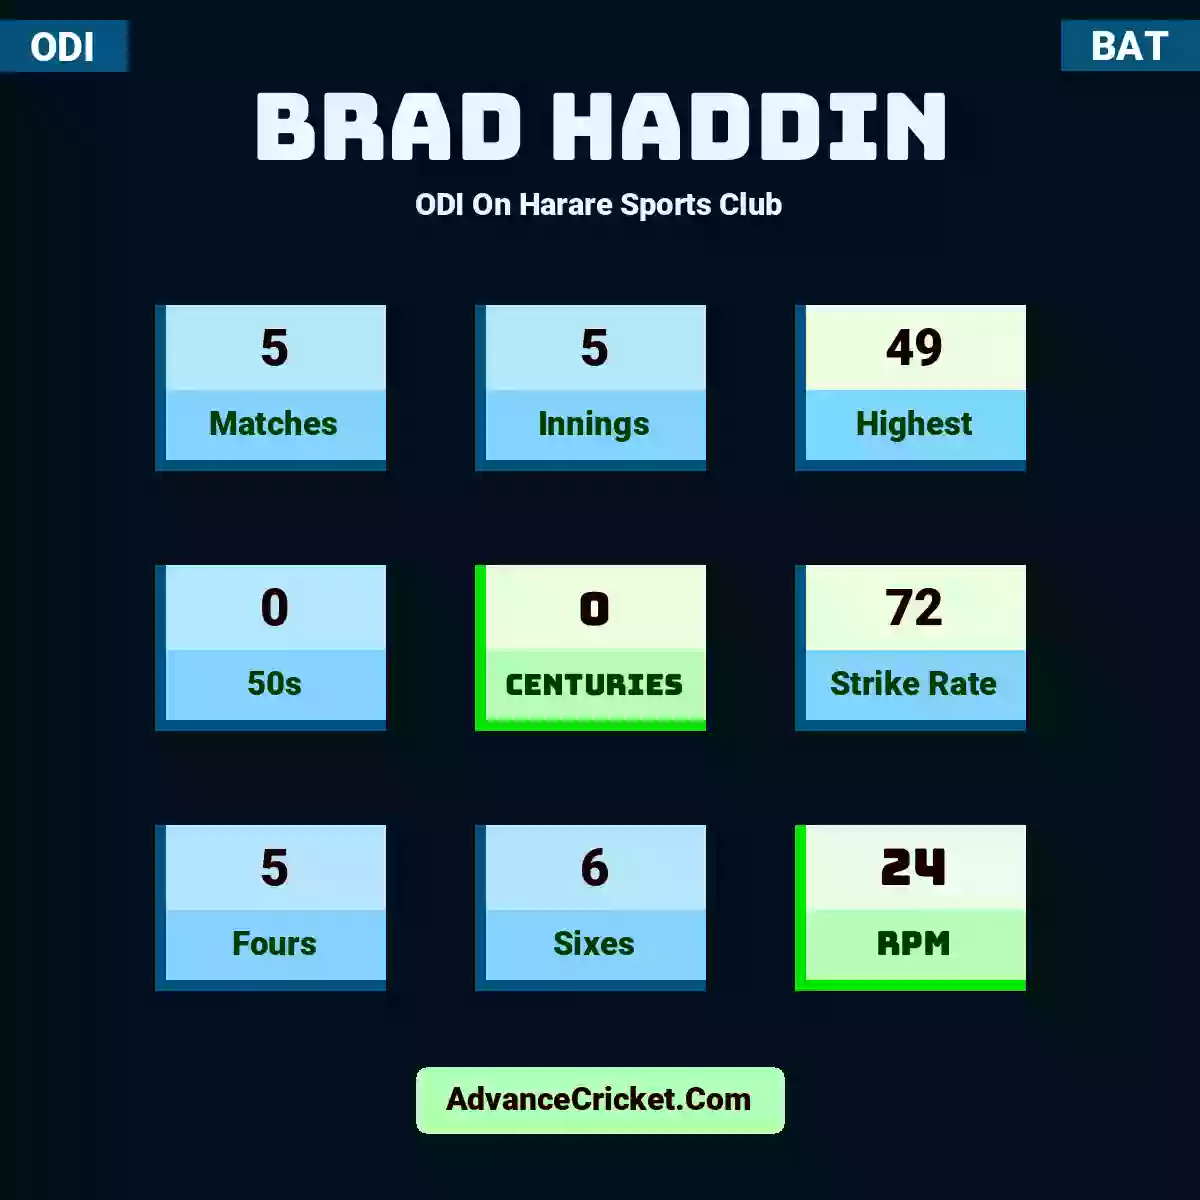 Brad Haddin ODI  On Harare Sports Club, Brad Haddin played 5 matches, scored 49 runs as highest, 0 half-centuries, and 0 centuries, with a strike rate of 72. B.Haddin hit 5 fours and 6 sixes, with an RPM of 24.